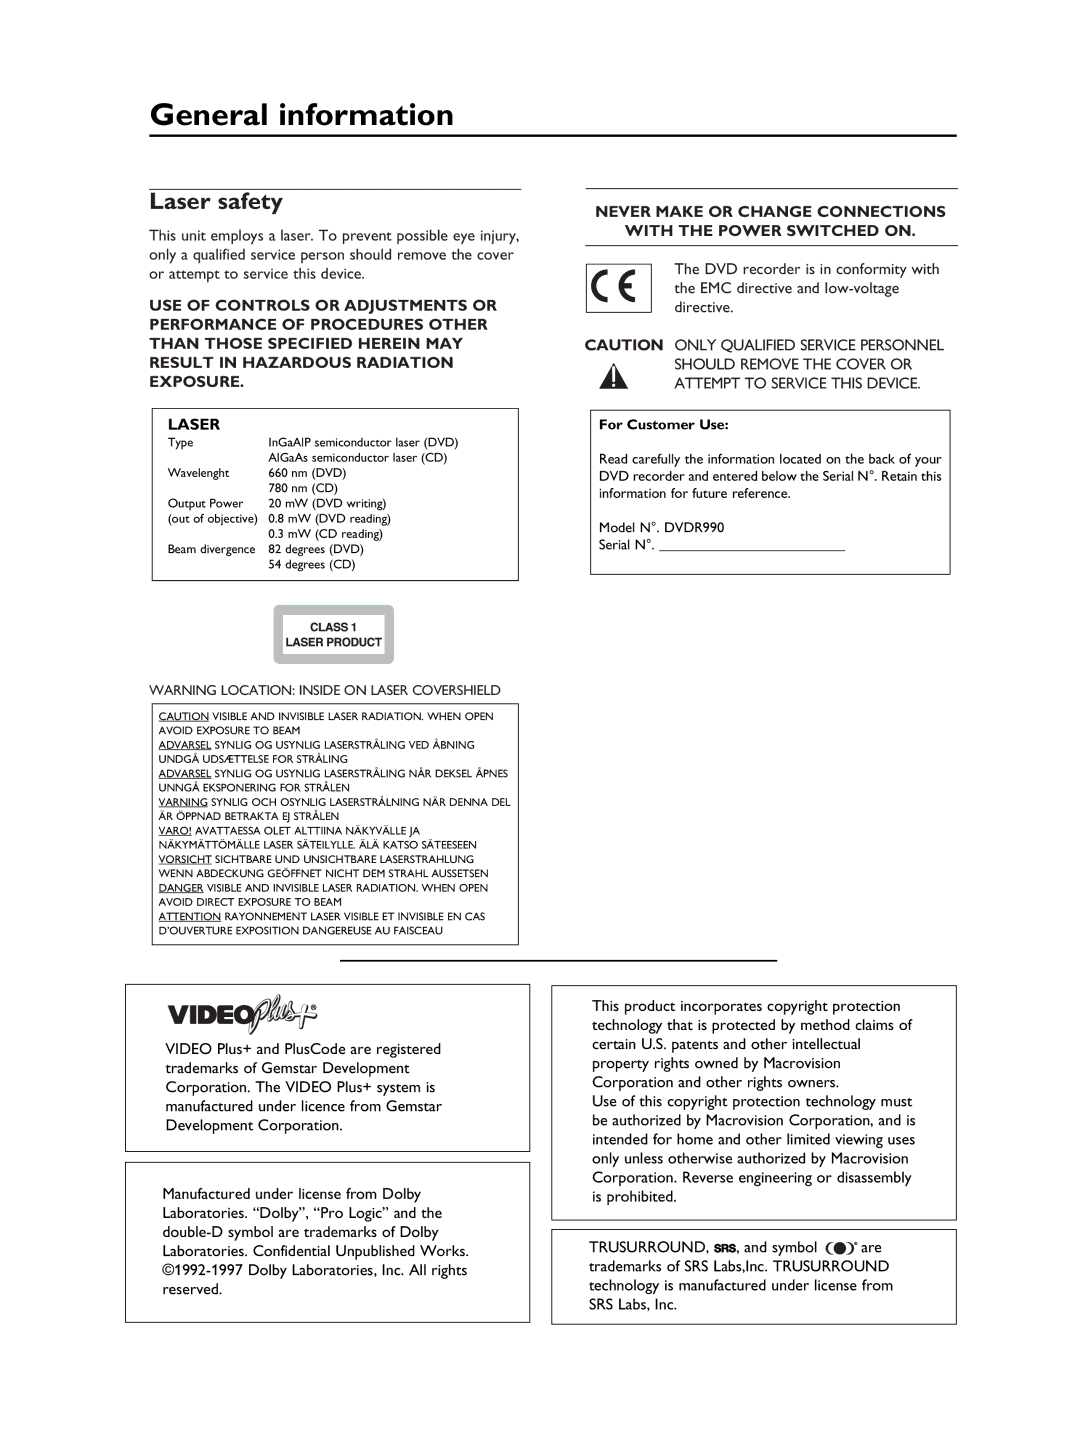 Philips DVDR990 manual General information, Laser safety, Never Make or Change Connections With the Power Switched on 